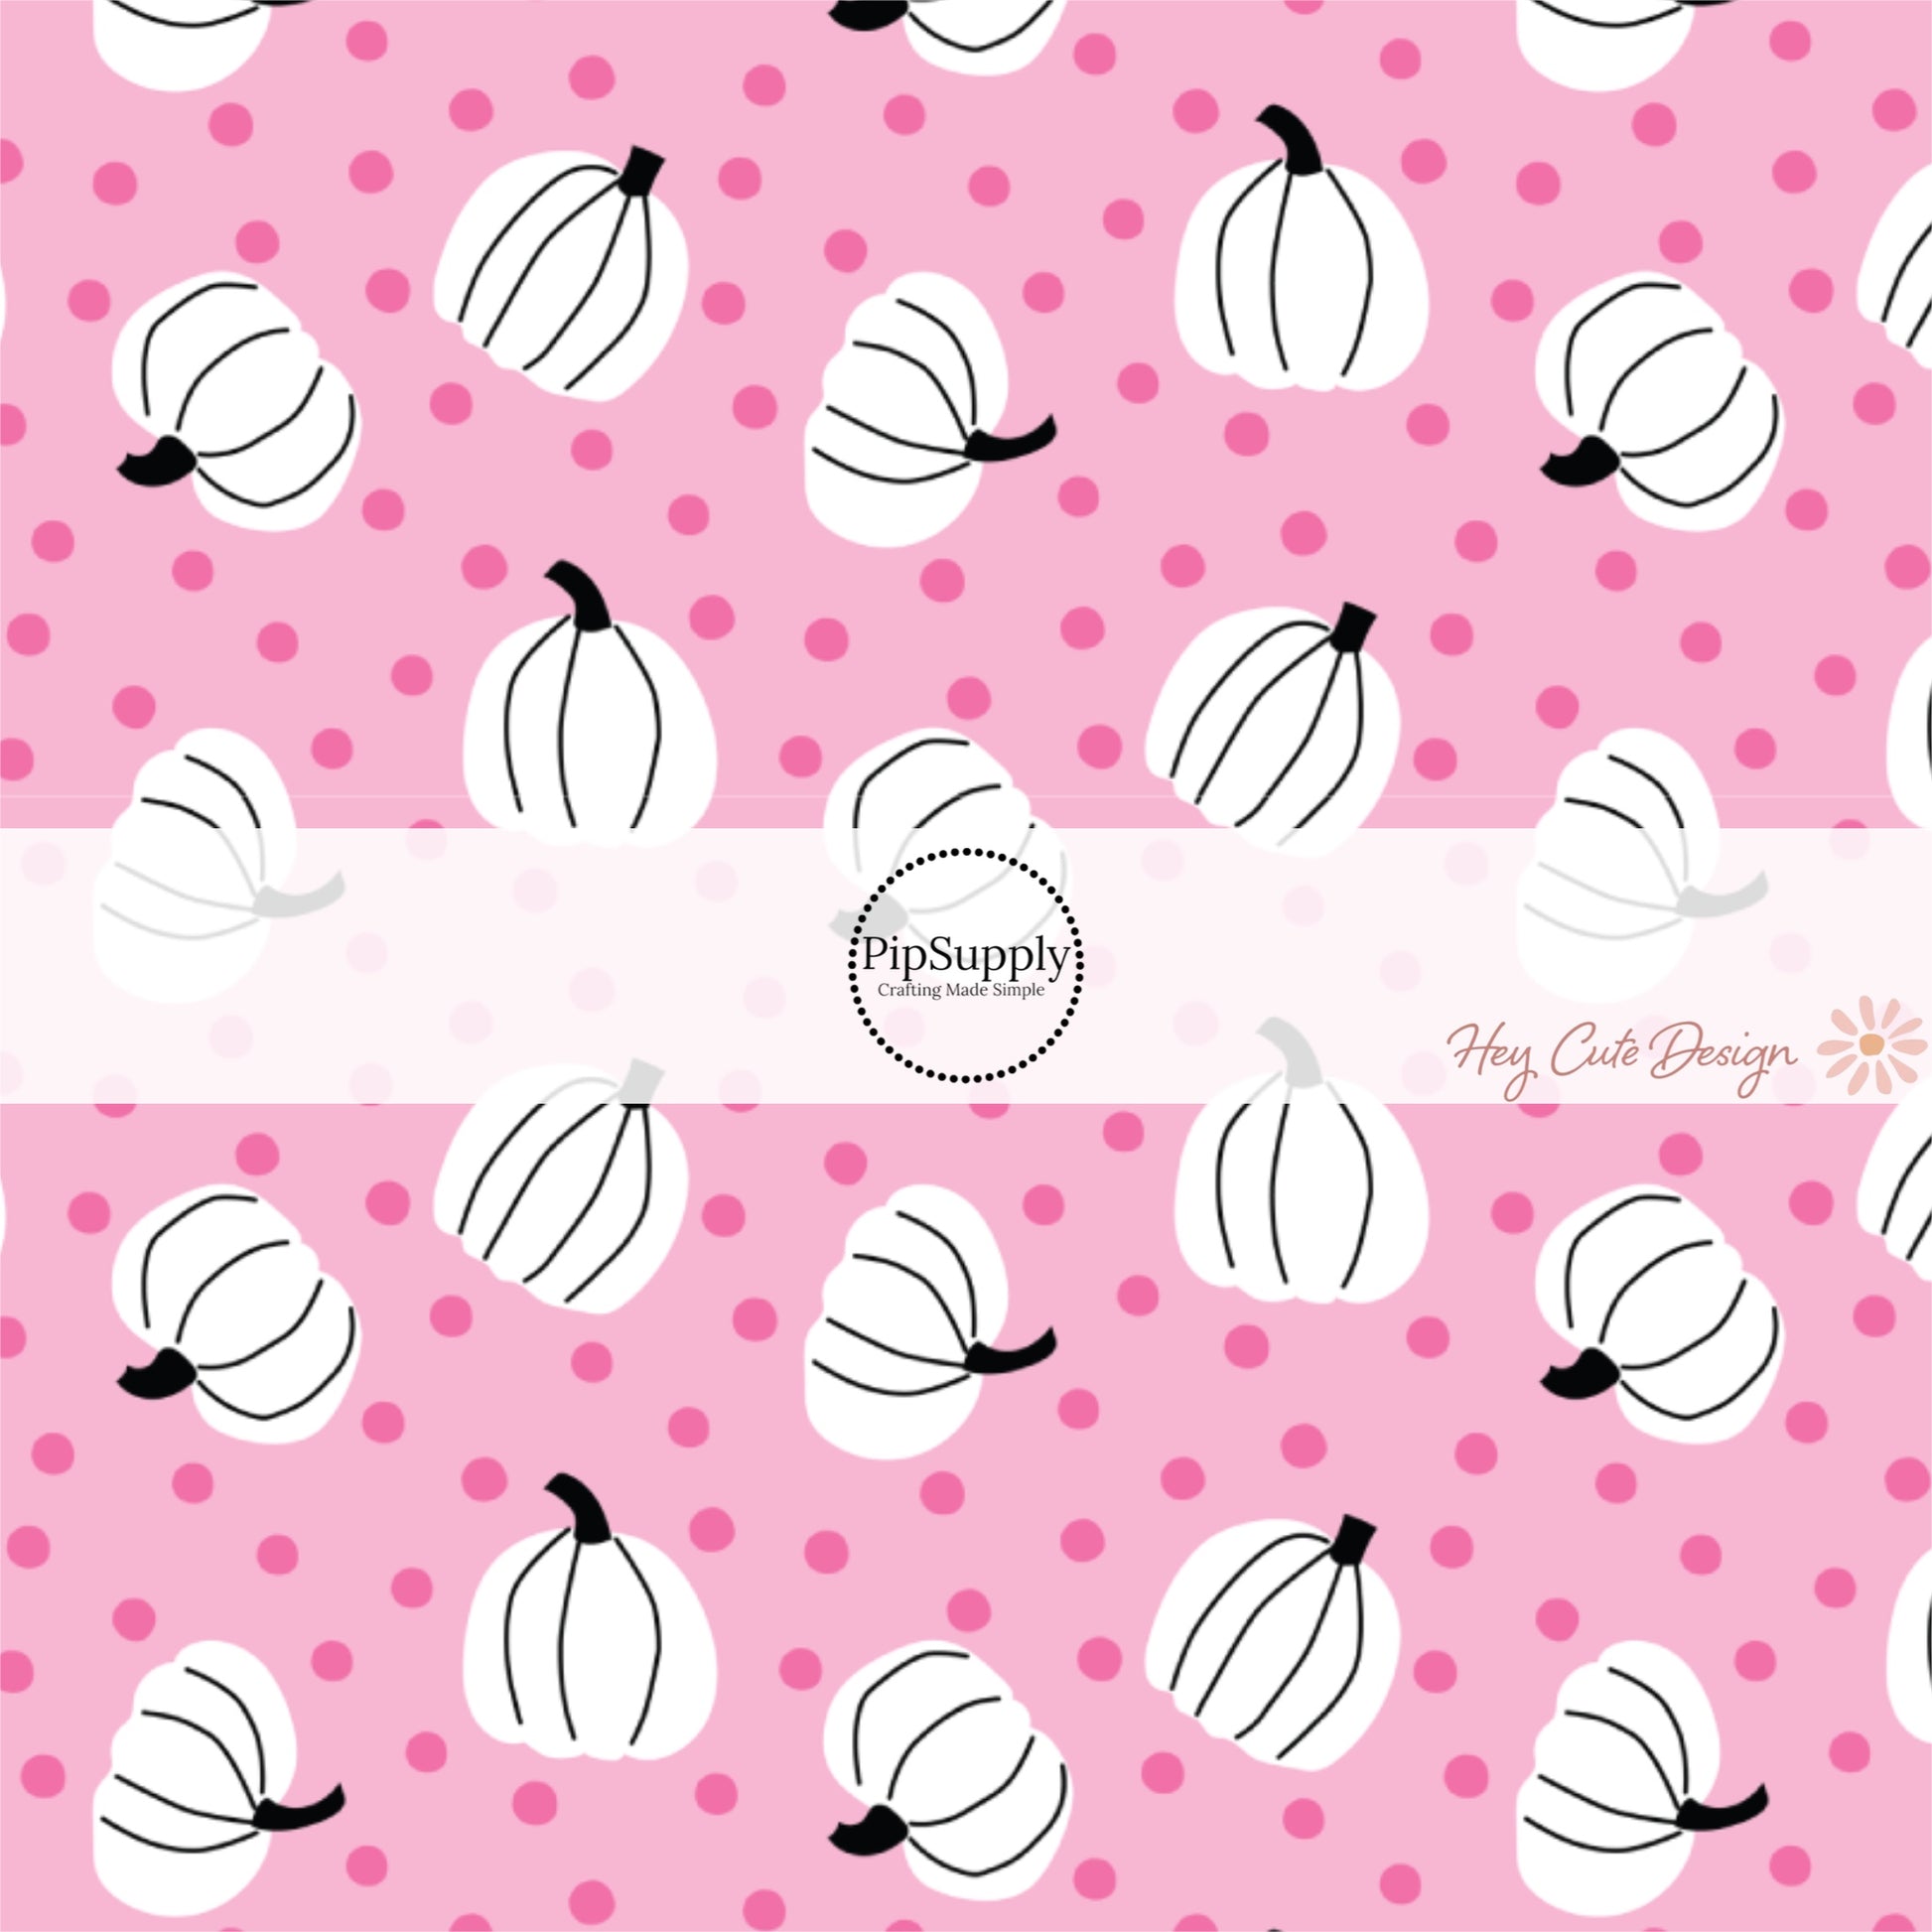 These Halloween themed pink fabric by the yard features white pumpkins surrounded by tiny pink dots on light pink. This fun spooky themed fabric can be used for all your sewing and crafting needs! 